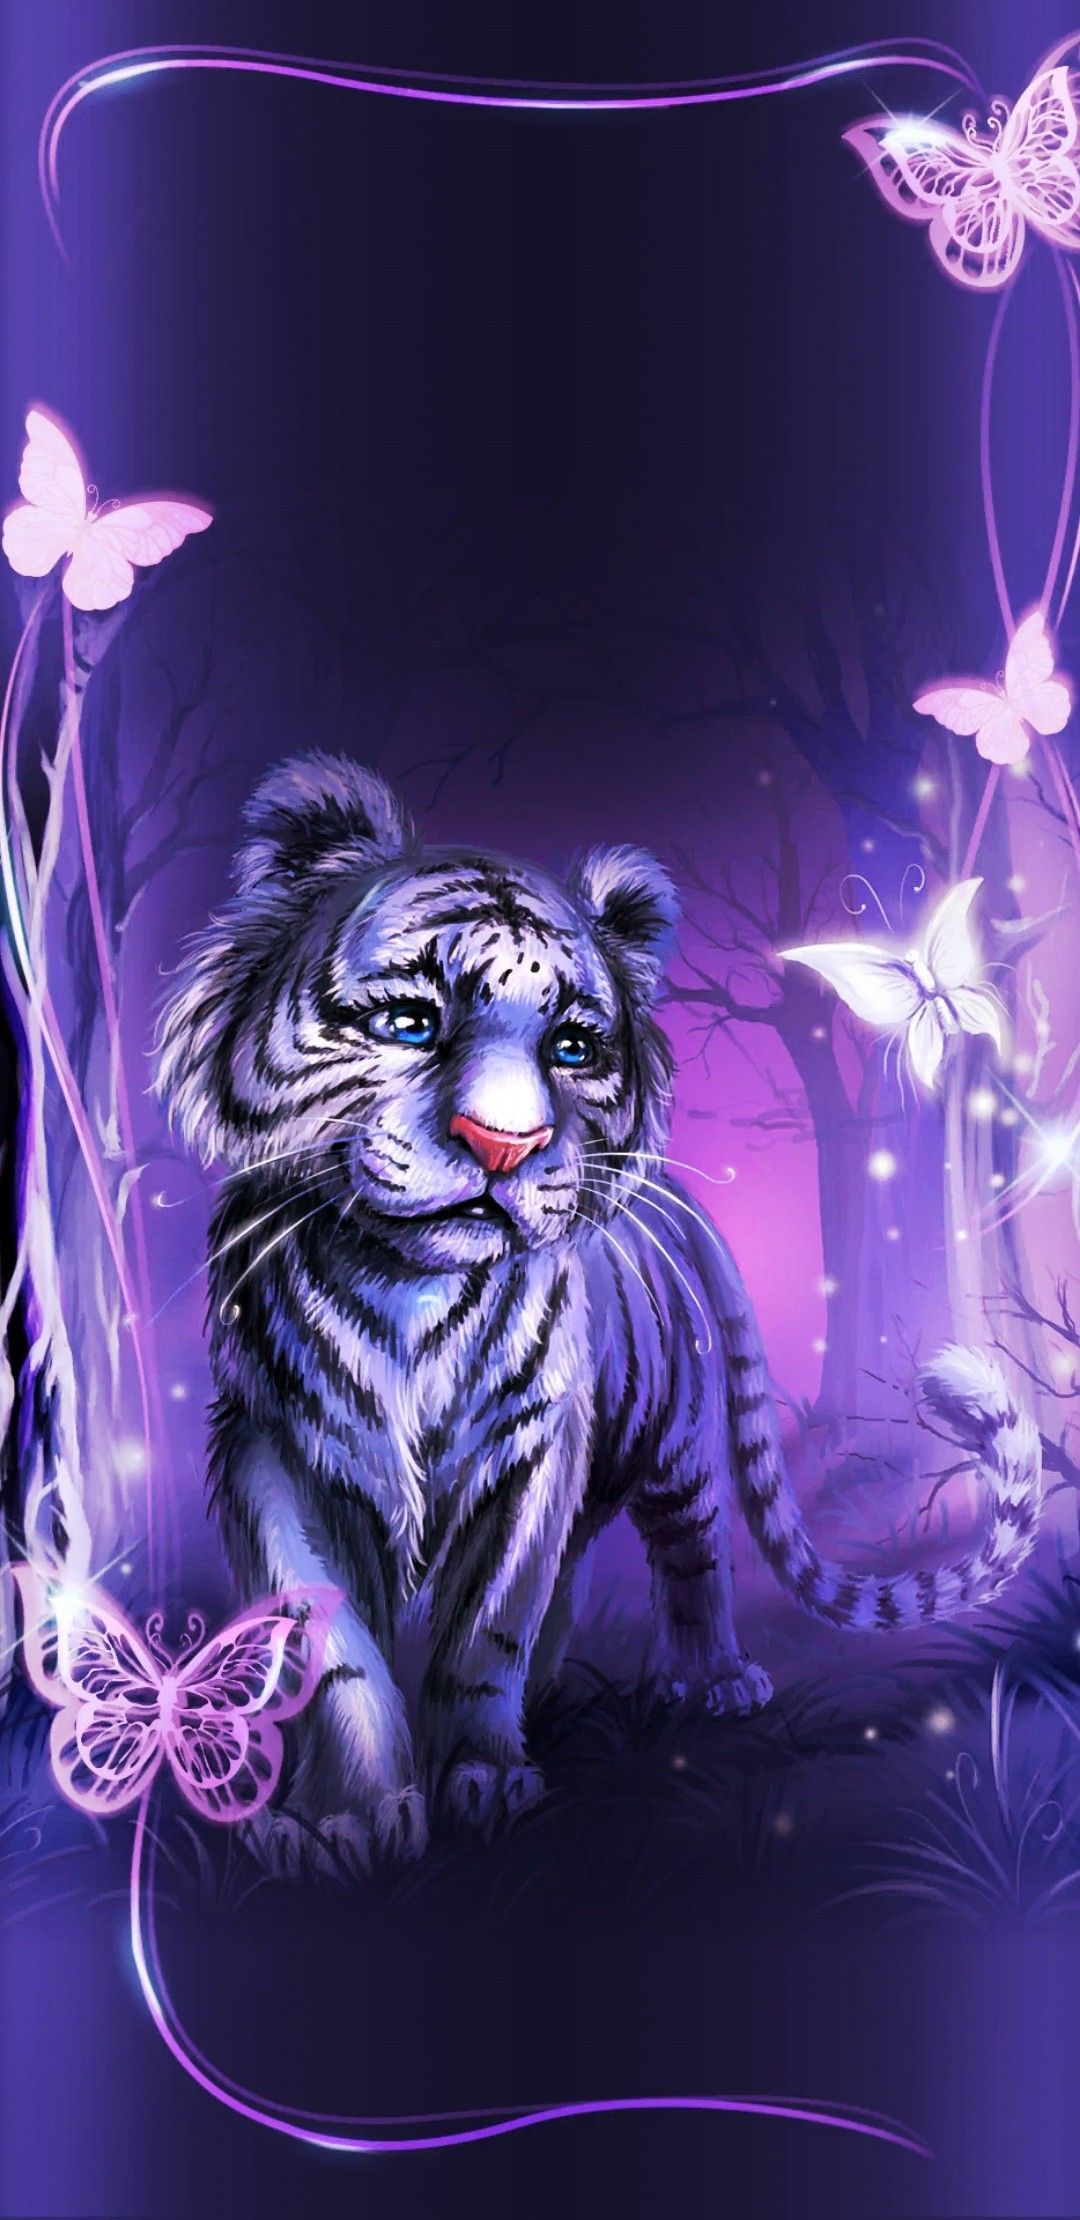 Purple passion. Cute animal drawings, Cute animals, Lion painting